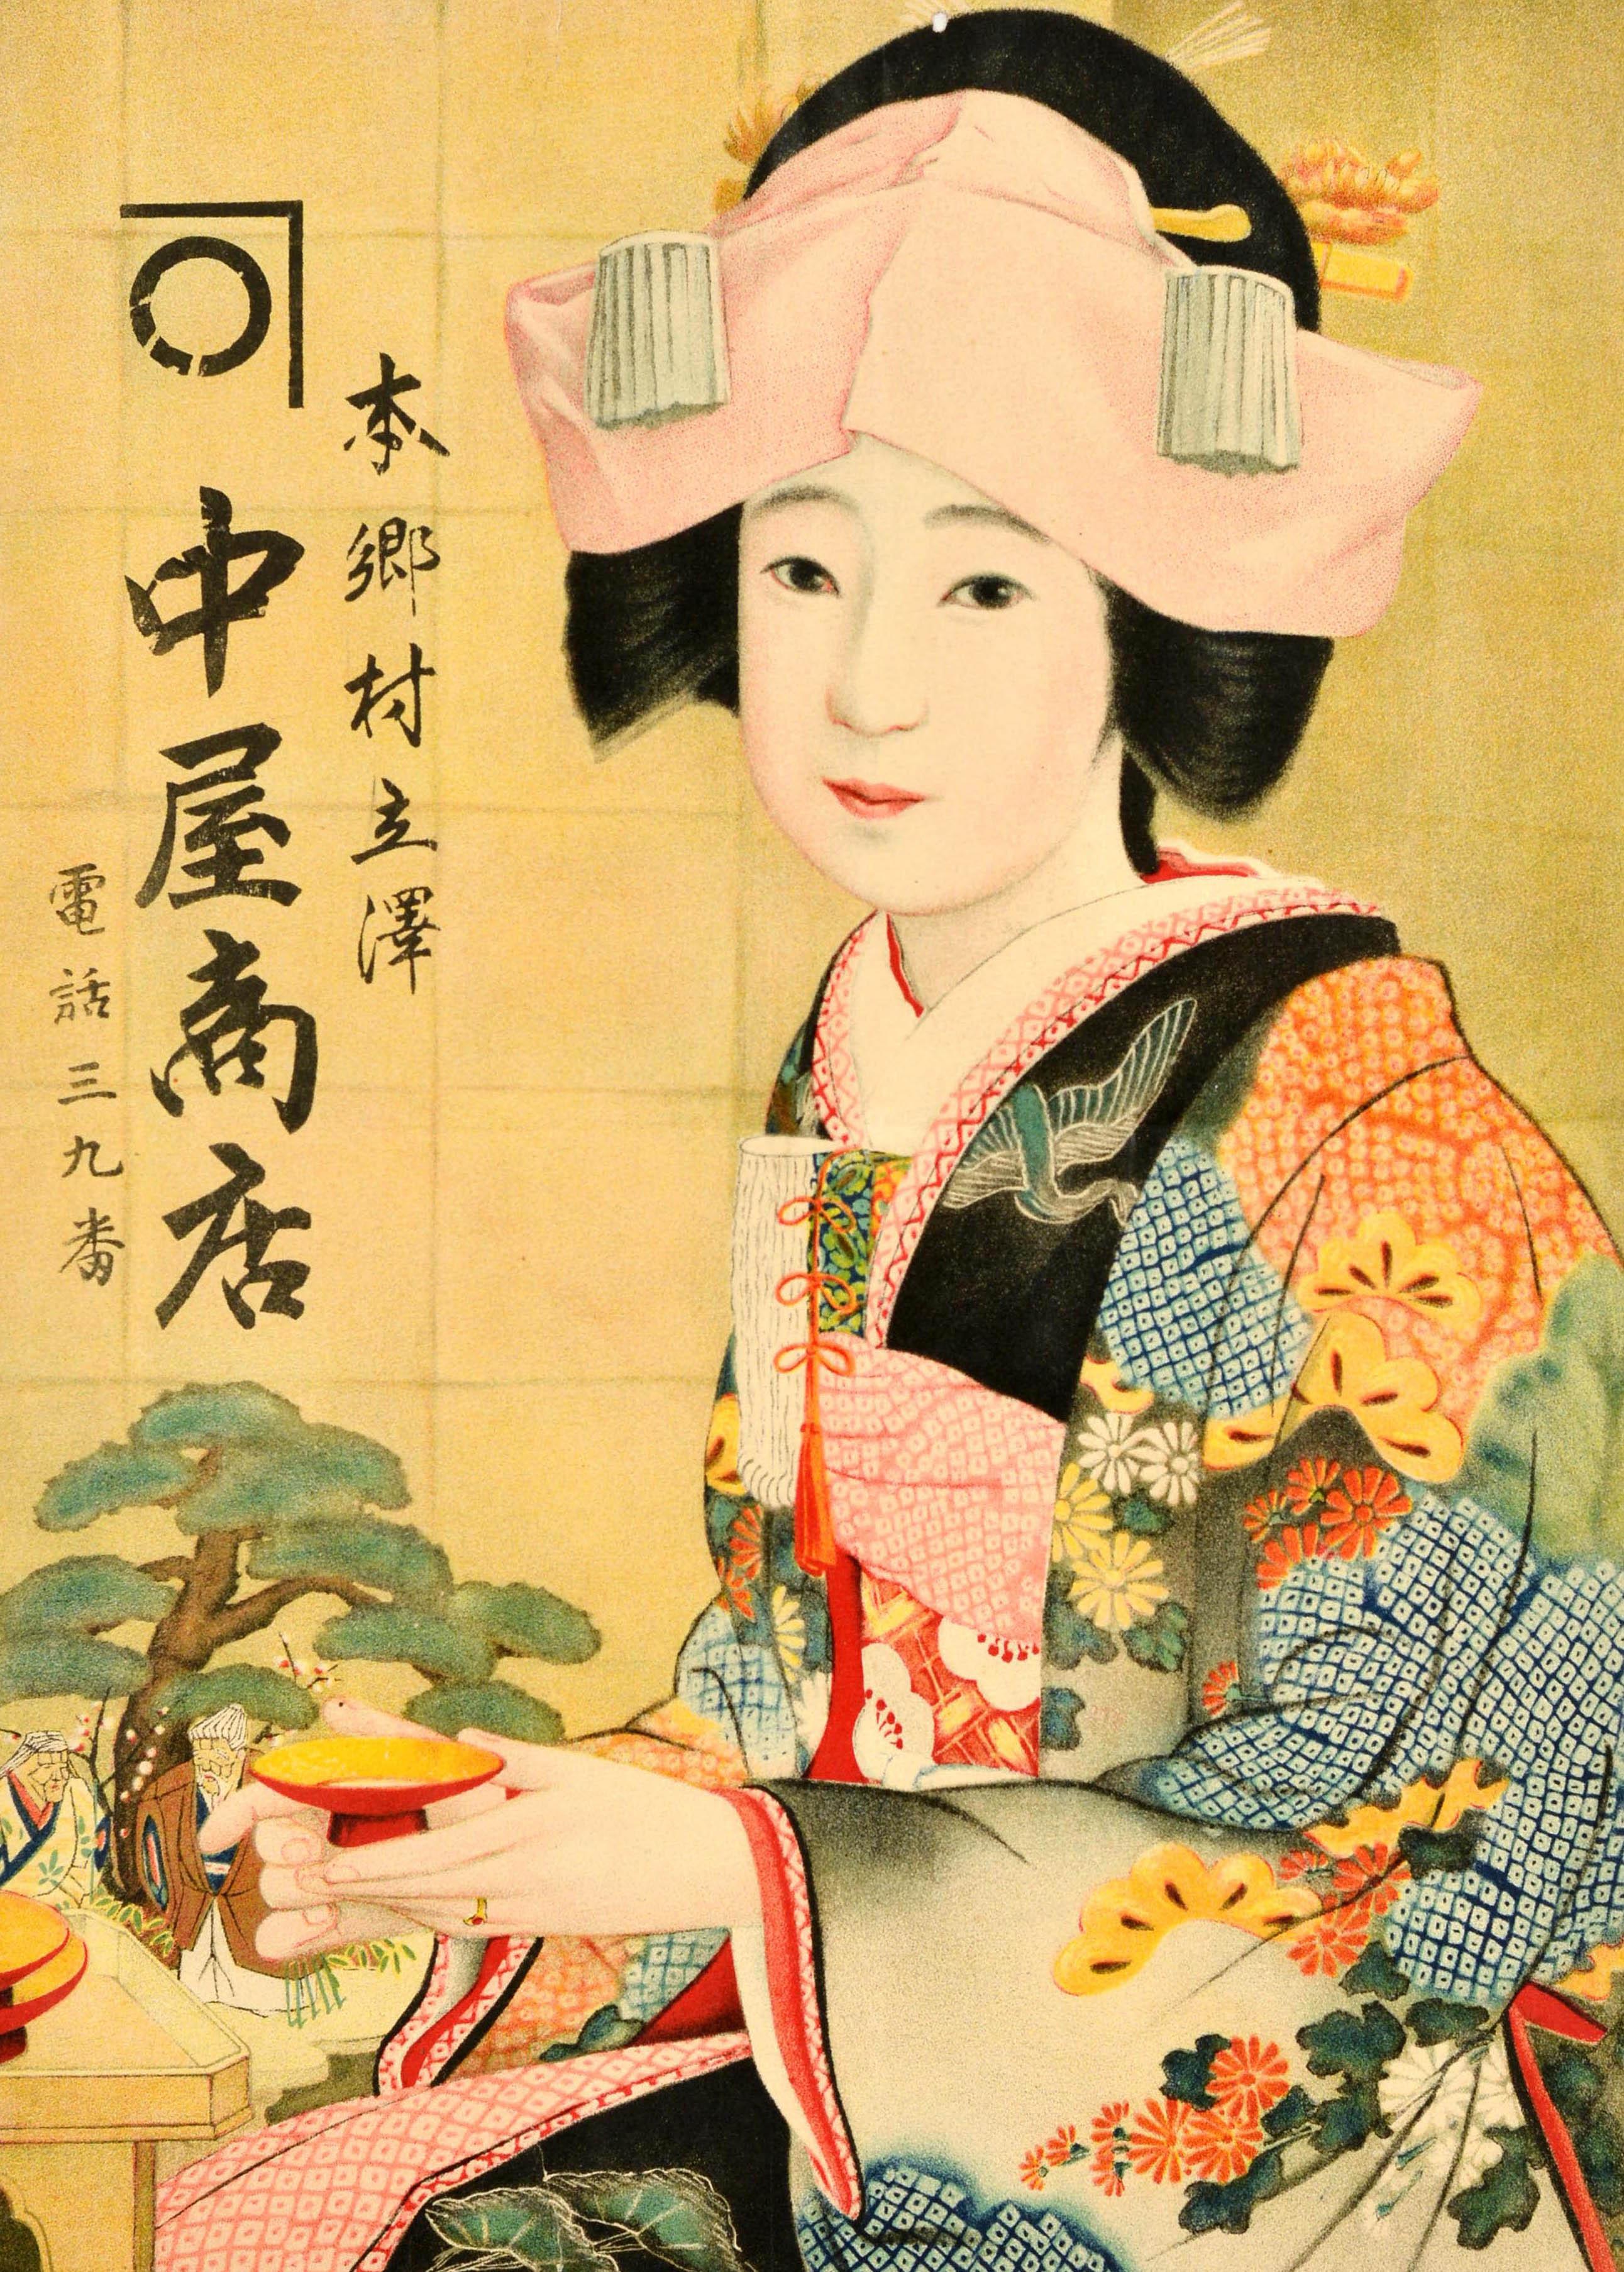 Original vintage advertising poster for the Hongo Village Tachisawa Kanakaya store featuring an illustration of a Japanese lady in a traditional headdress and kimono clothing with floral patterns on it, holding a cup of tea with the text in black